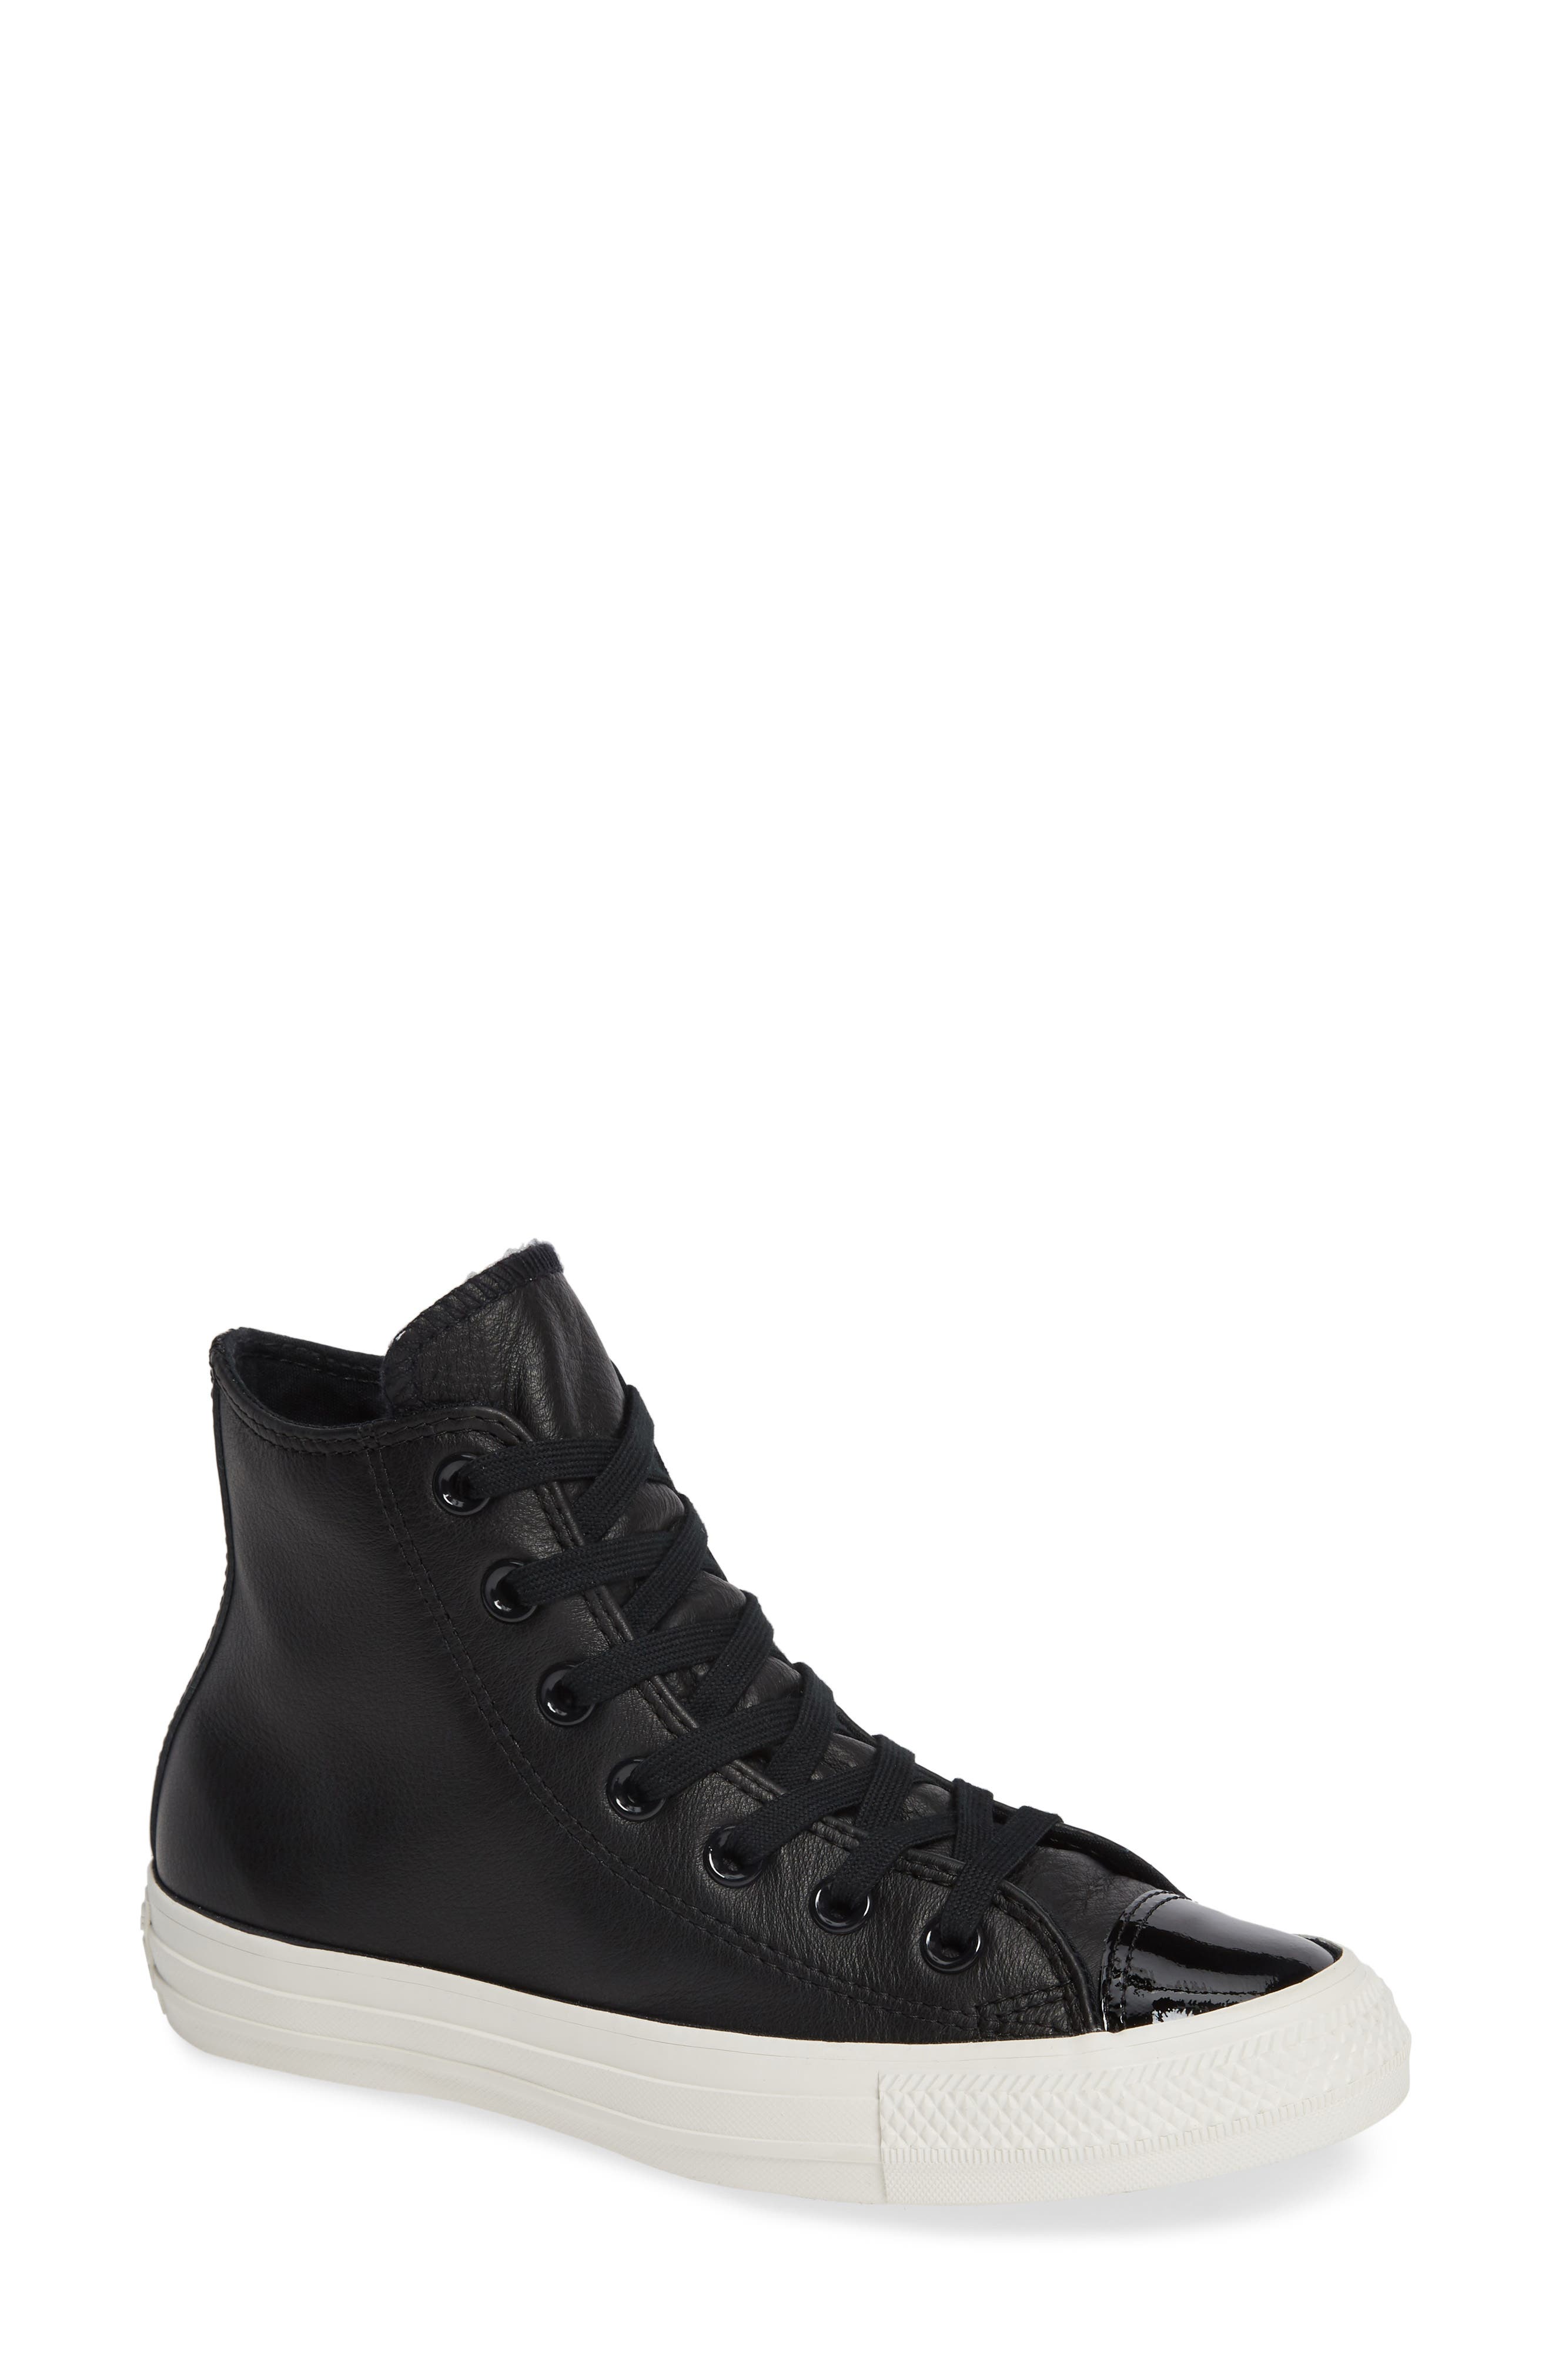 womens black patent leather converse